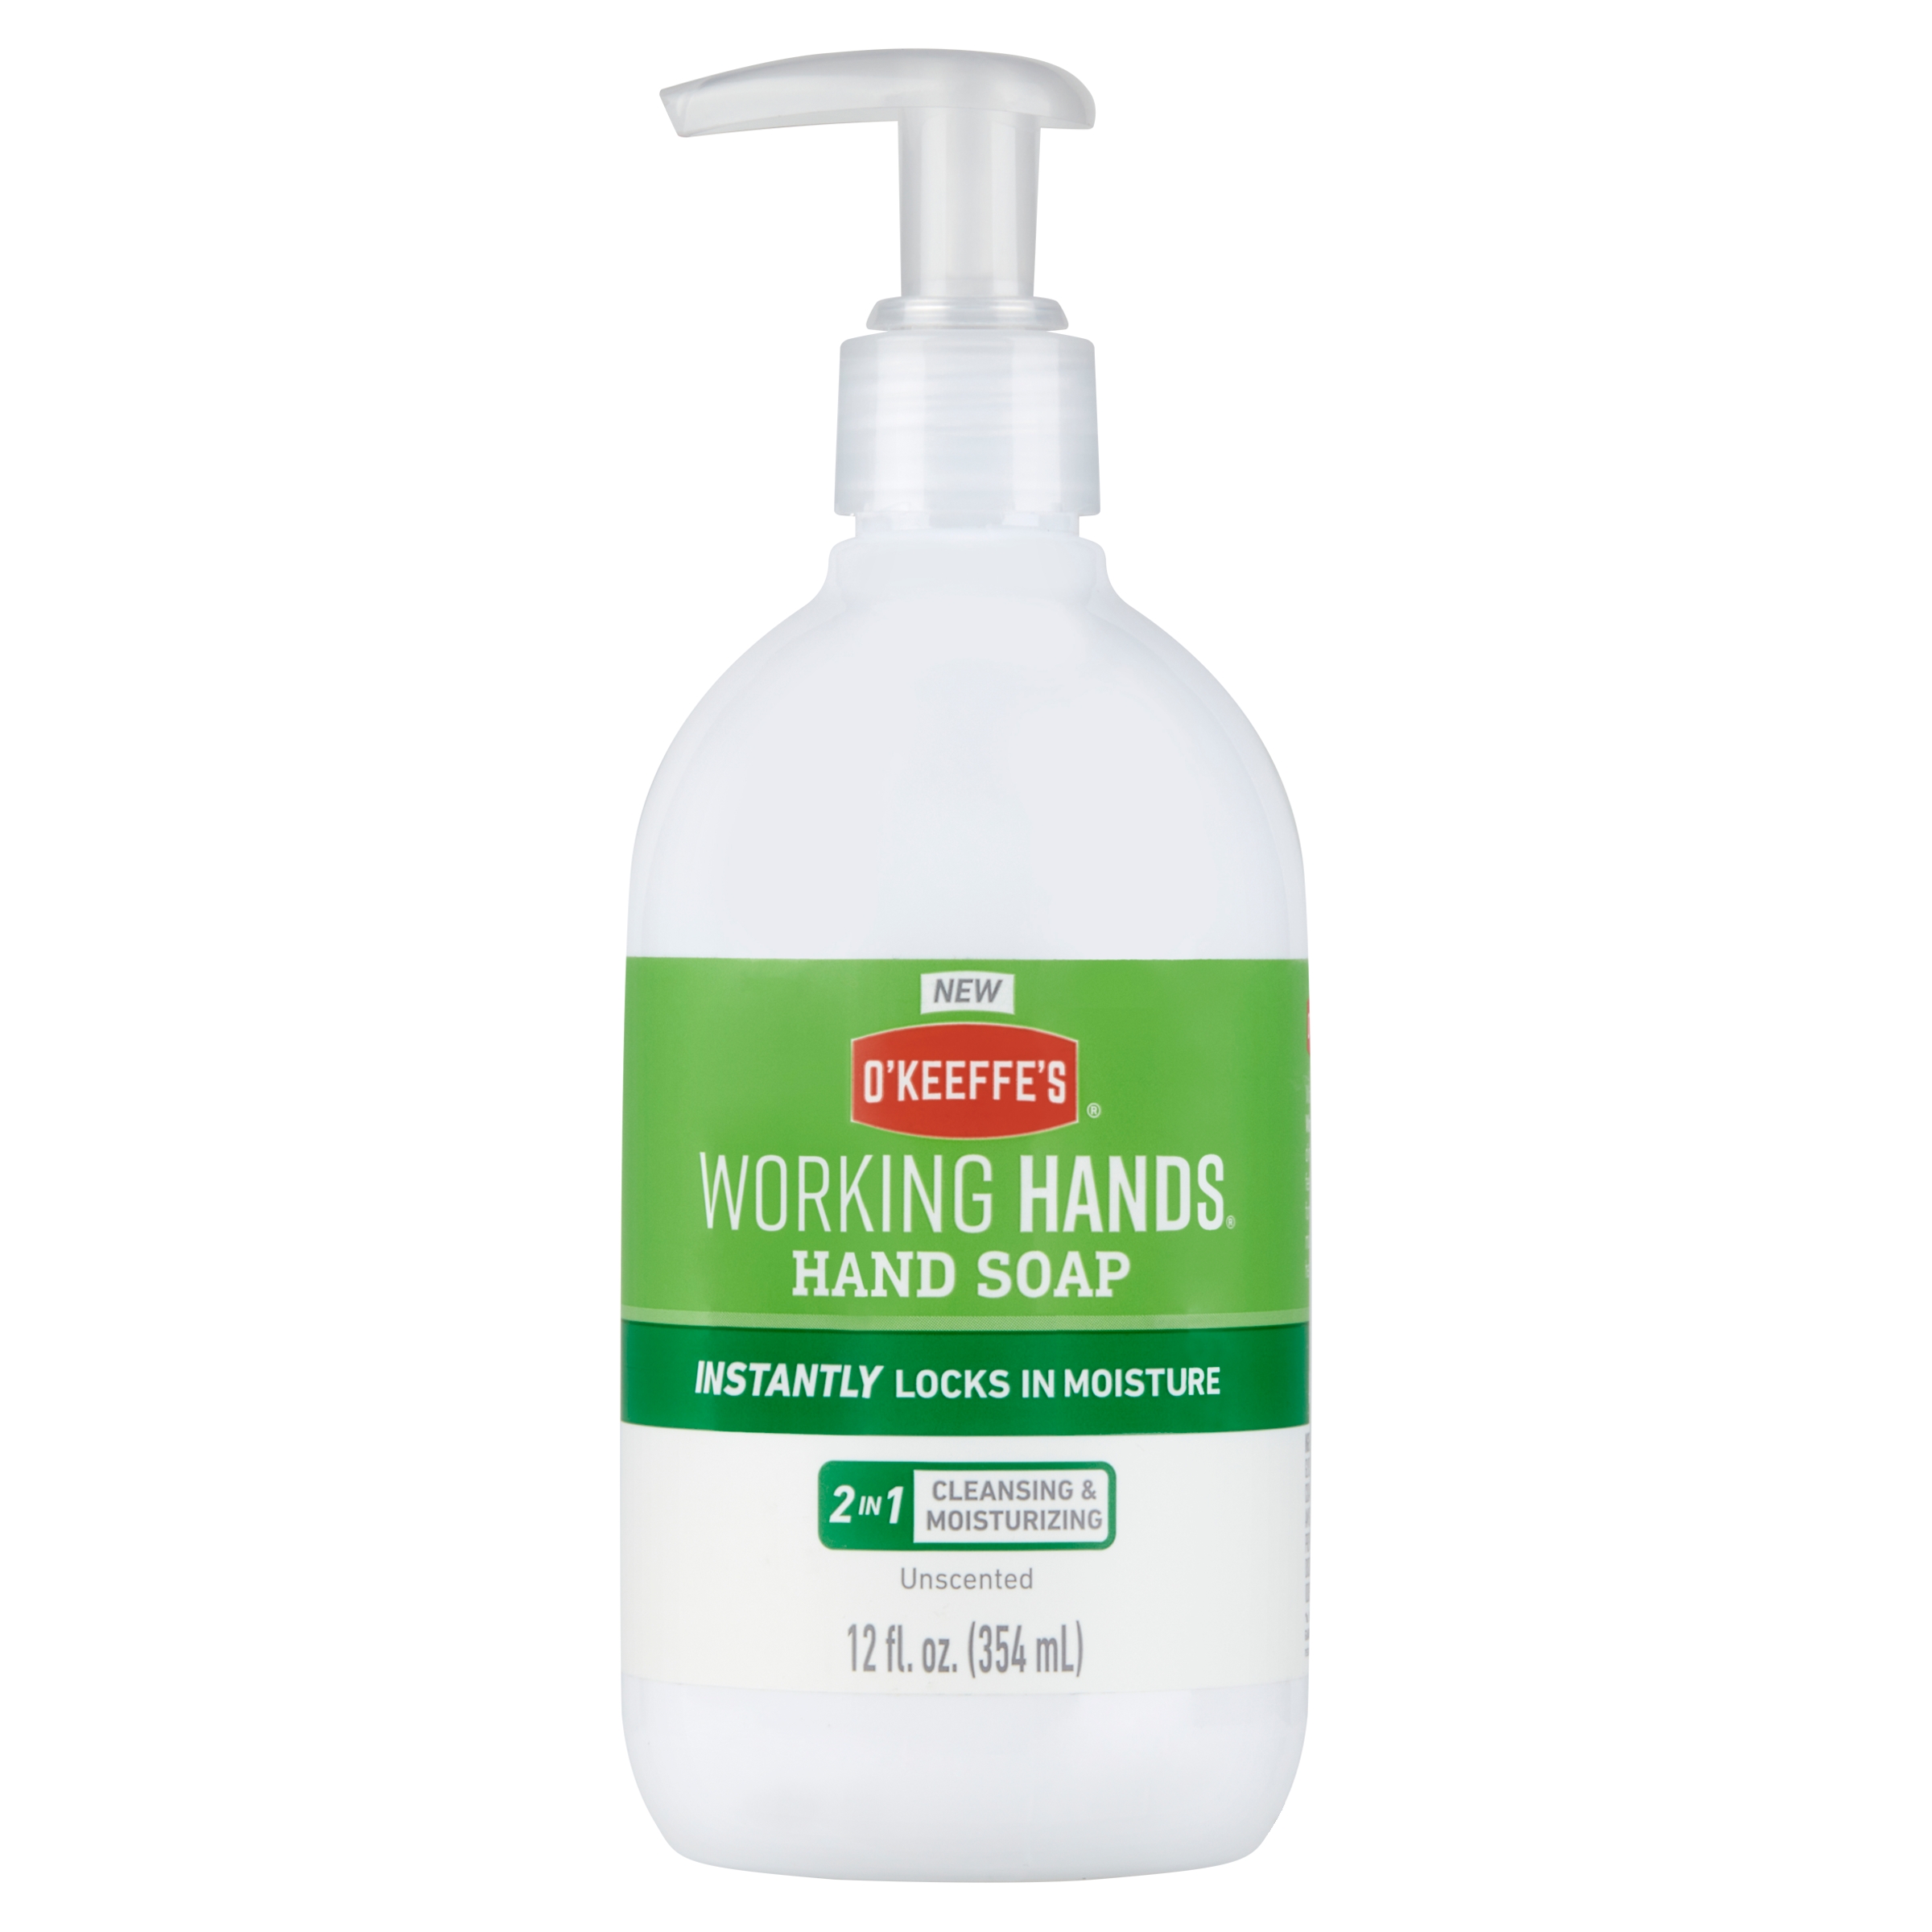 O'Keeffe's Working Hands Moisturizing Liquid Hand Soap, Unscented, 12 fl oz (354 ml) - image 1 of 13